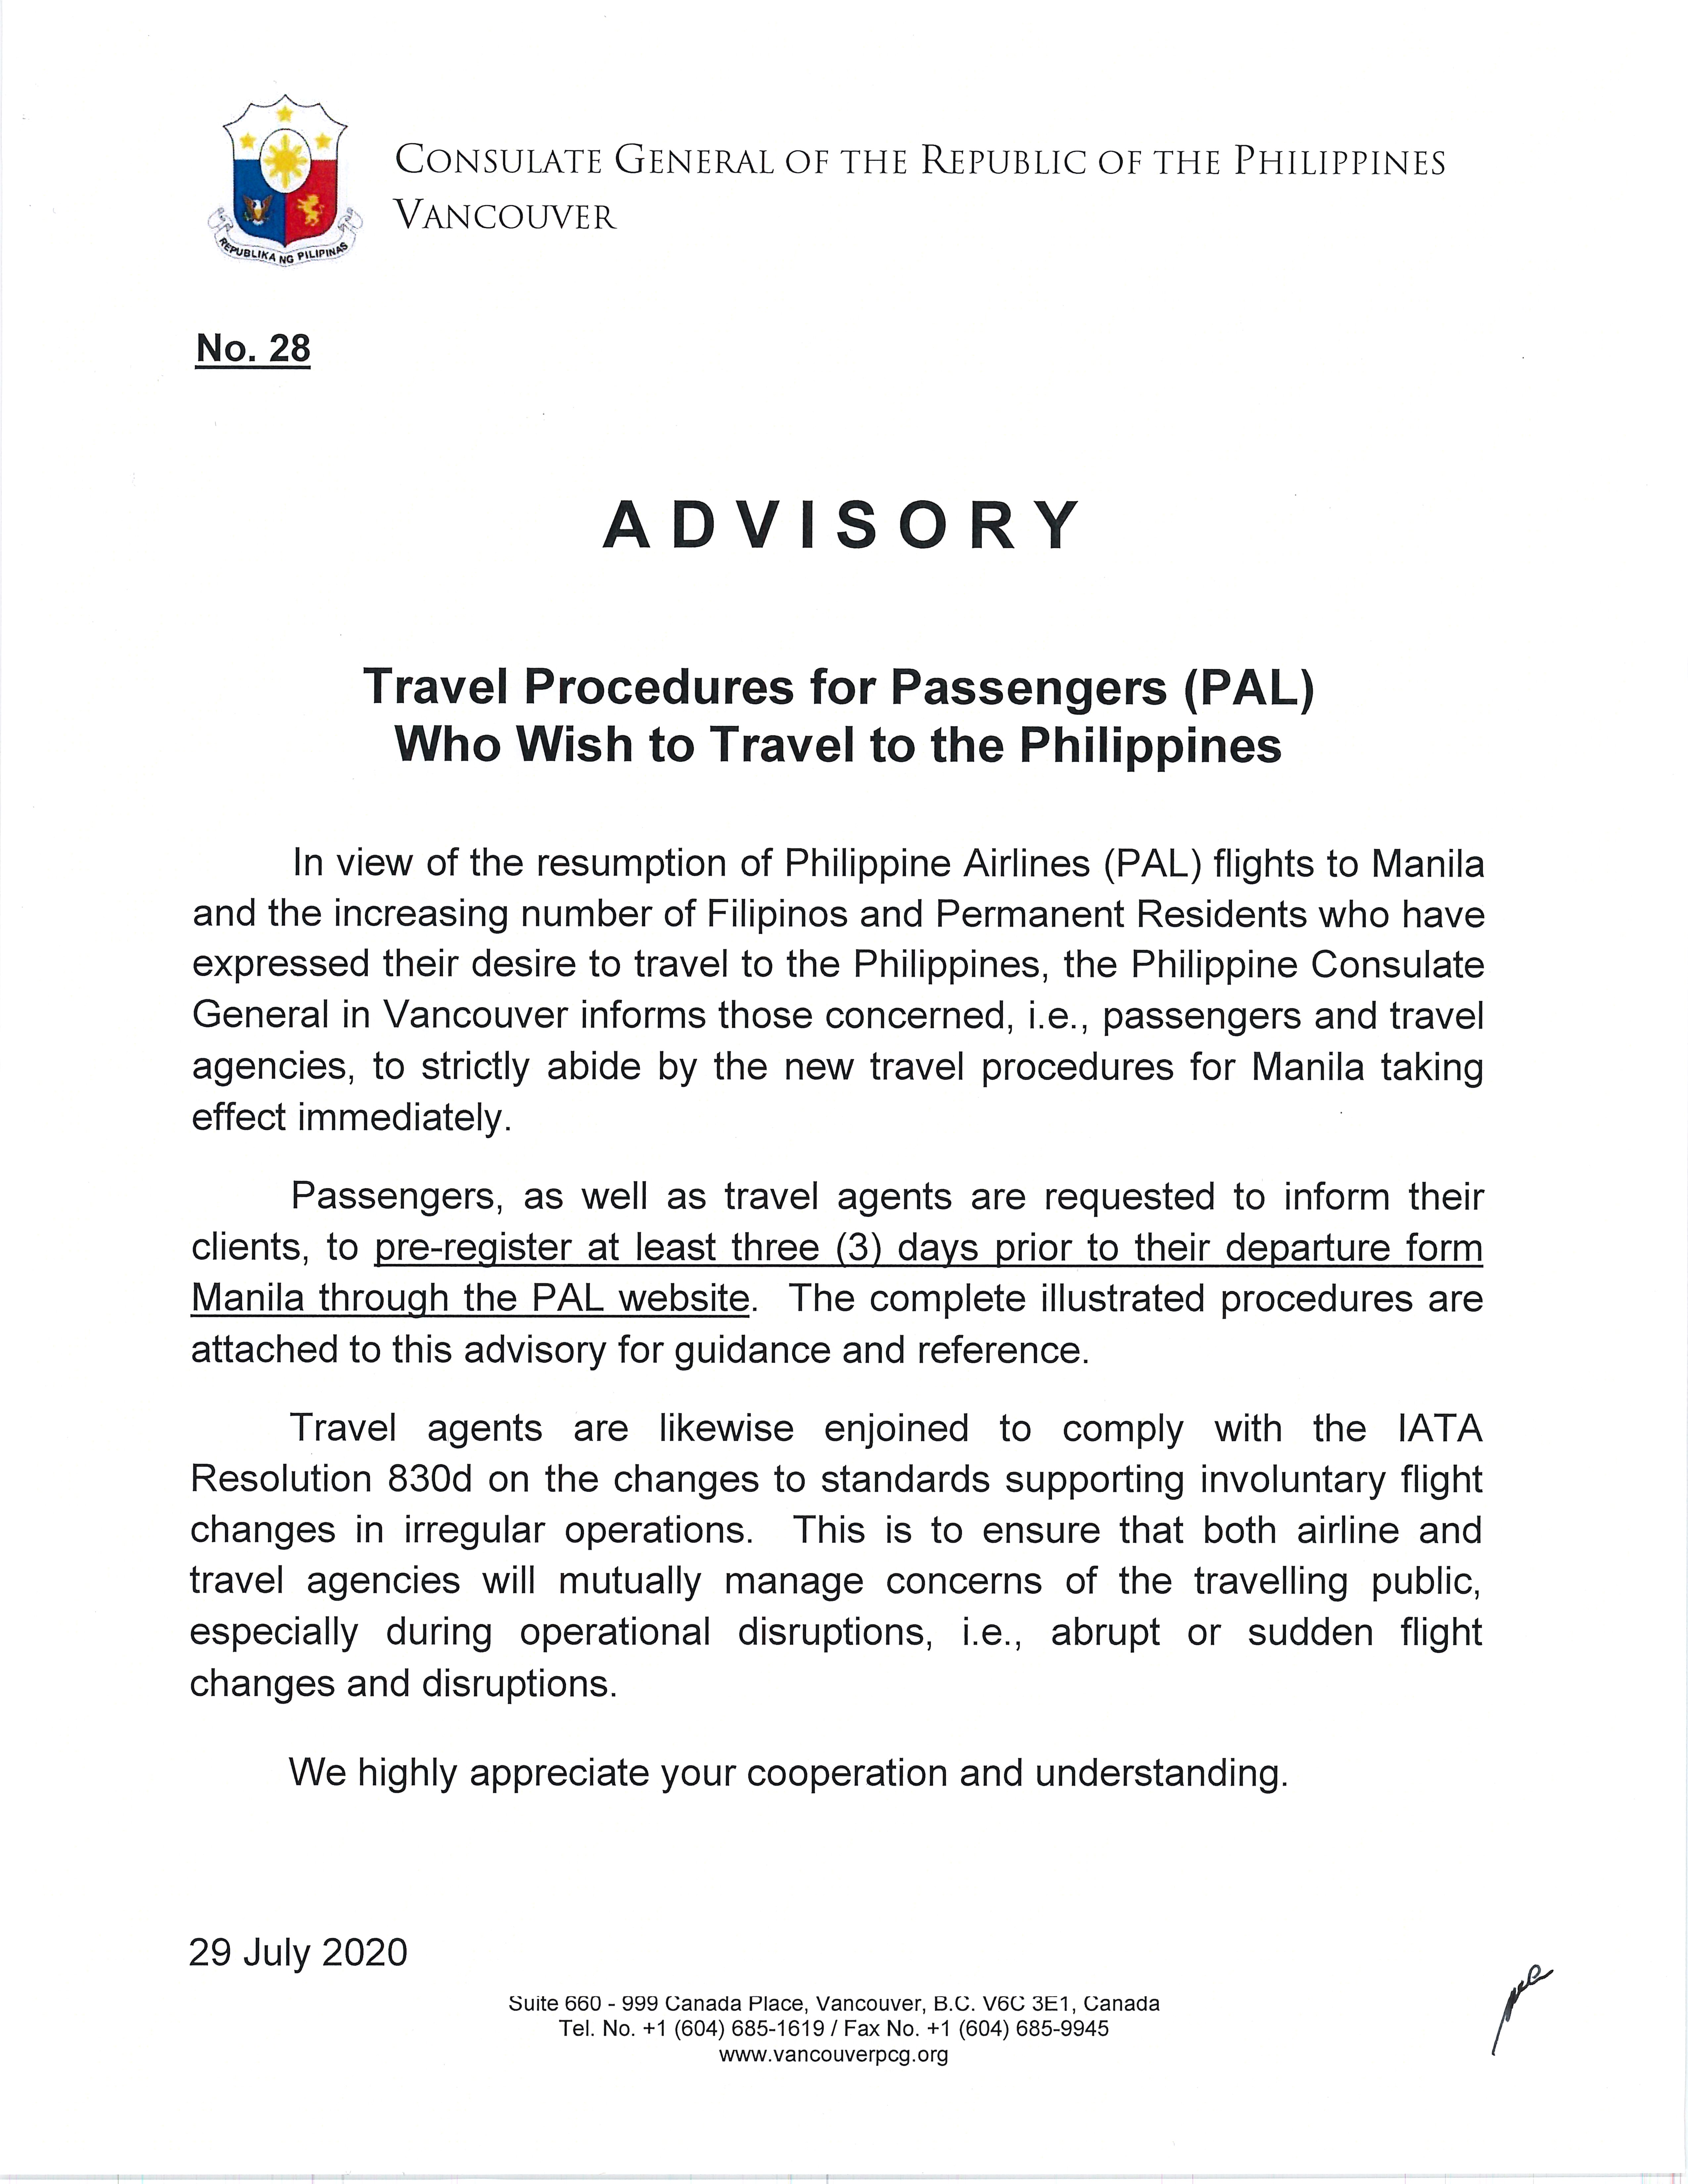 Advisory - Travel Procedures for Passengers (PAL) Who Wish to Travel to the  Philippines - Vancouver Philippines Consulate General